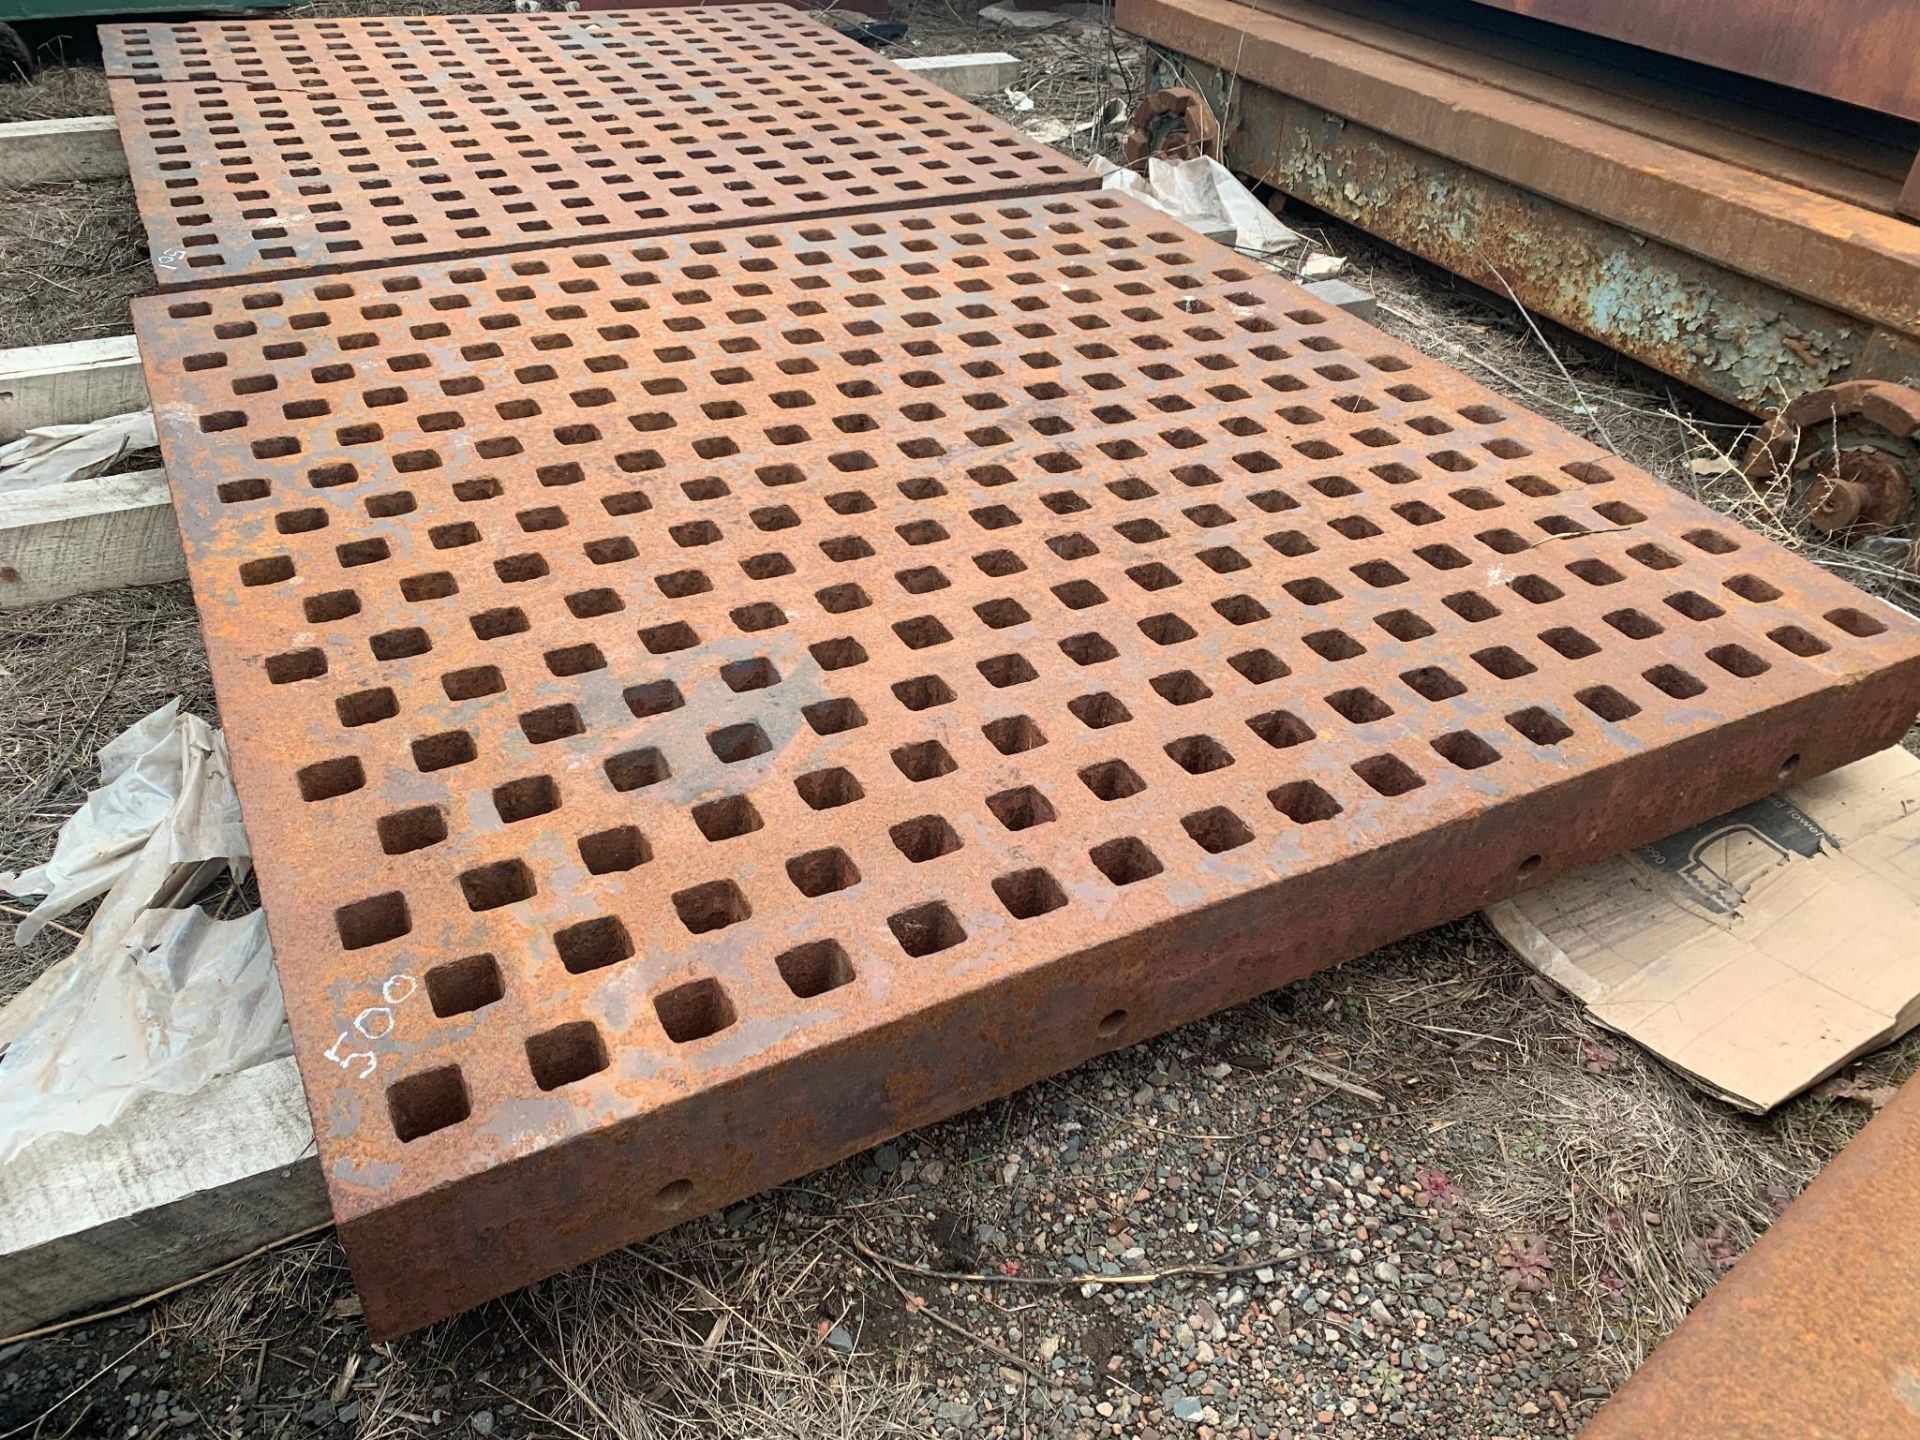 Acorn Style Welding Platen. Approx 61.5" x 61.5" x 5.25" deep with 2" square holes. Note: Small crac - Image 32 of 33